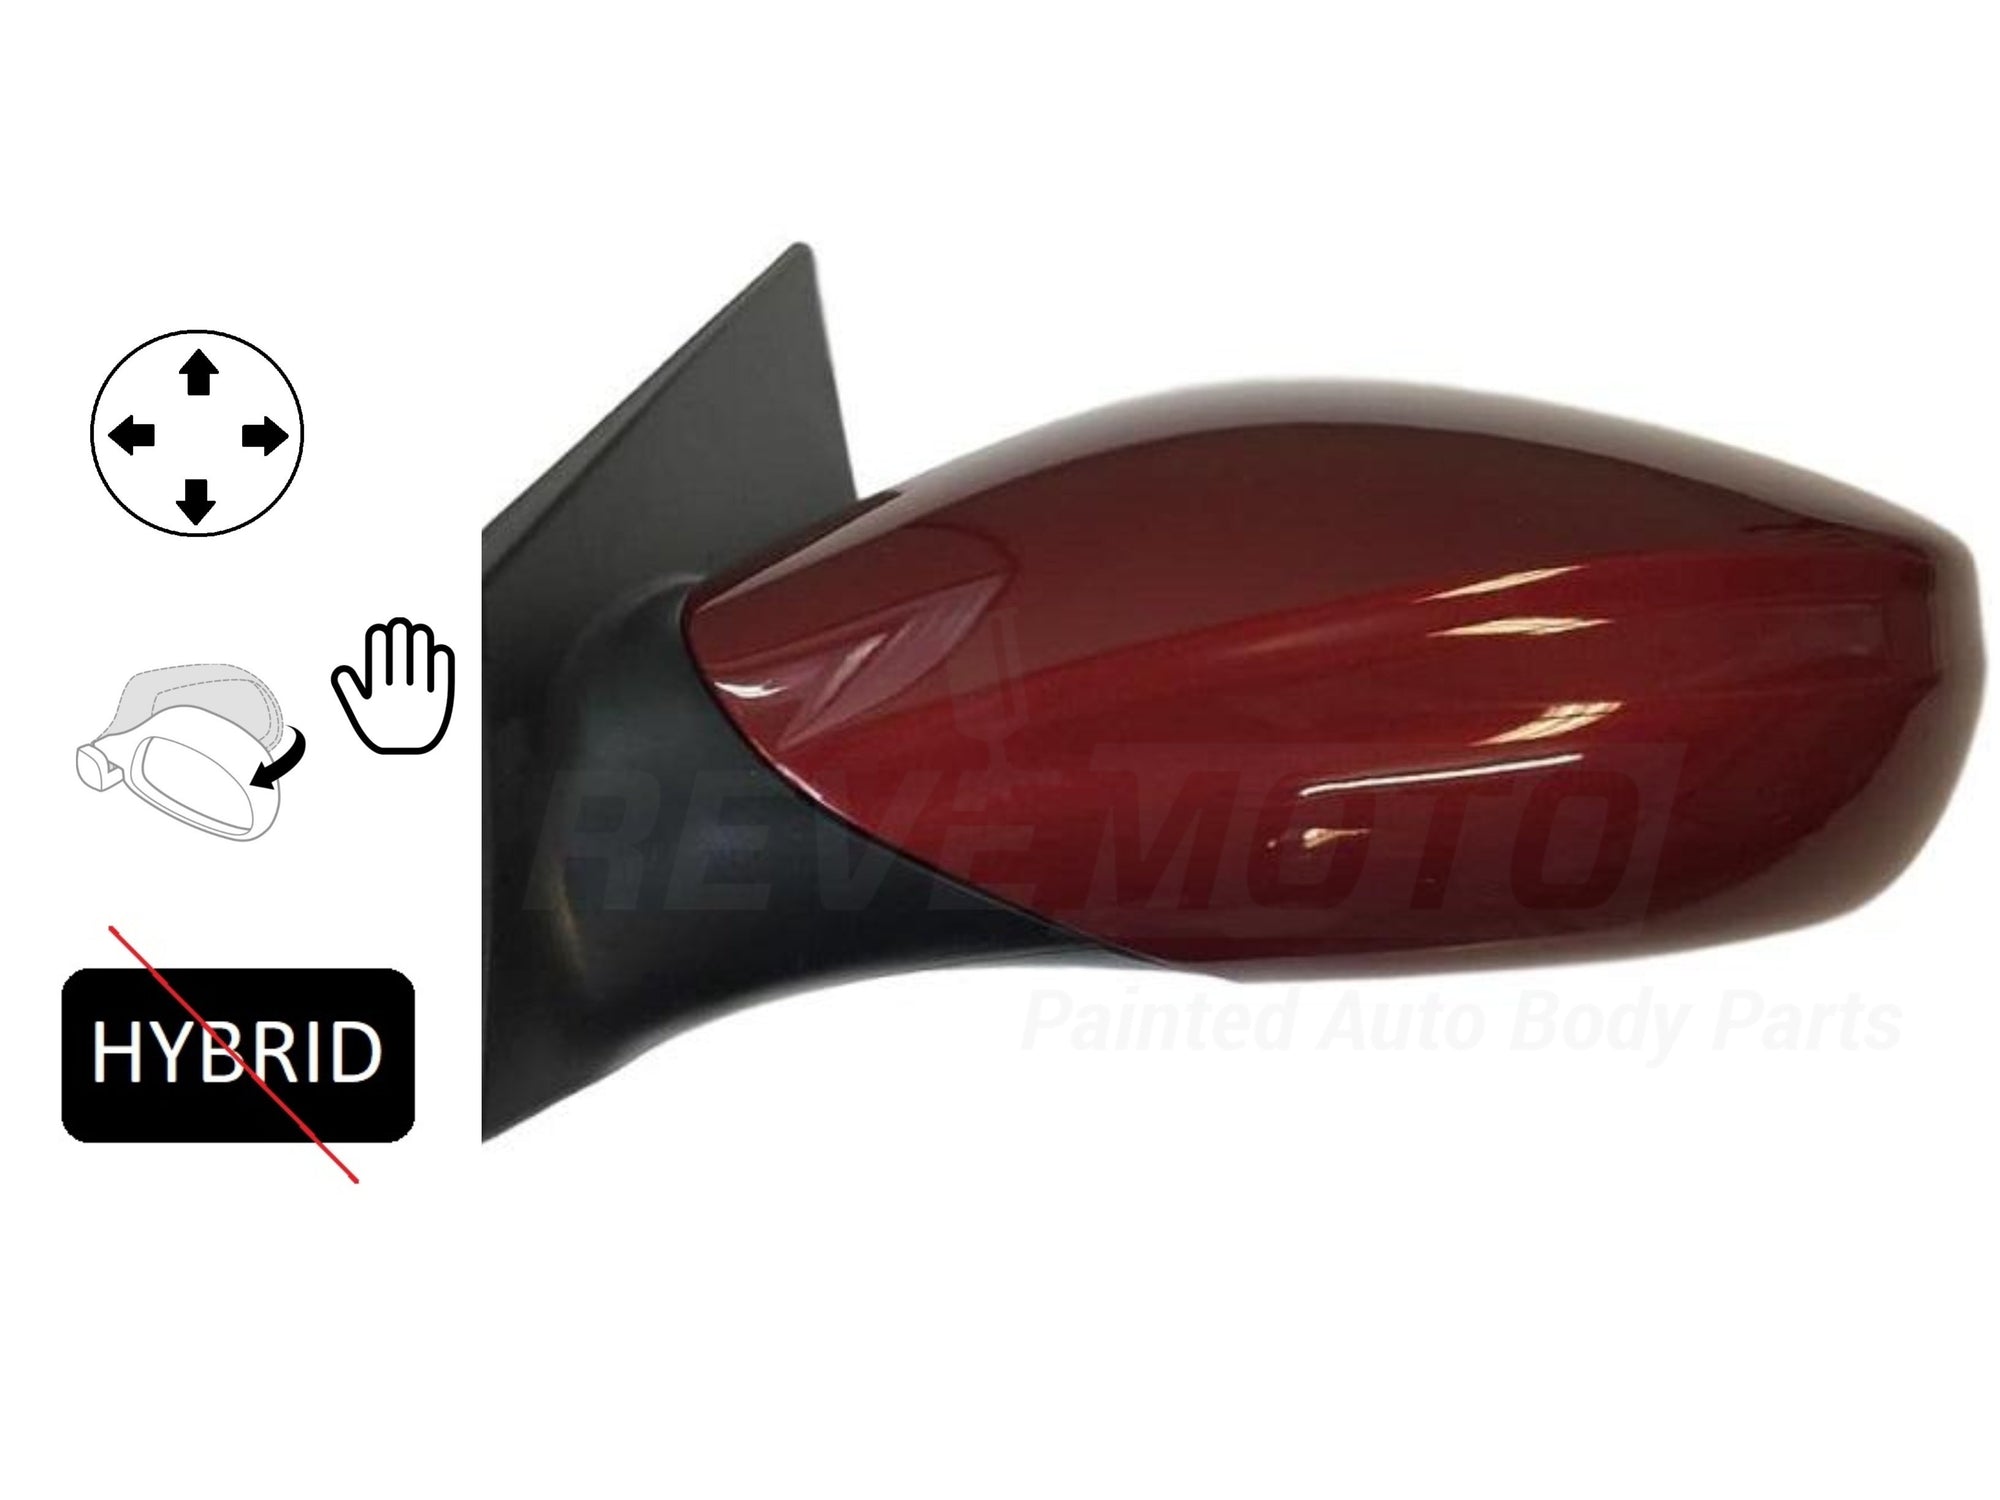 2012_Hyundai_Sonata_Driver_Side_View_Mirror_Non-Heated_wo_Turn_Signal_Power_Manual_Folding_Except_Hybrid_Painted_Sparkling_Ruby_Red_T4_876103Q000